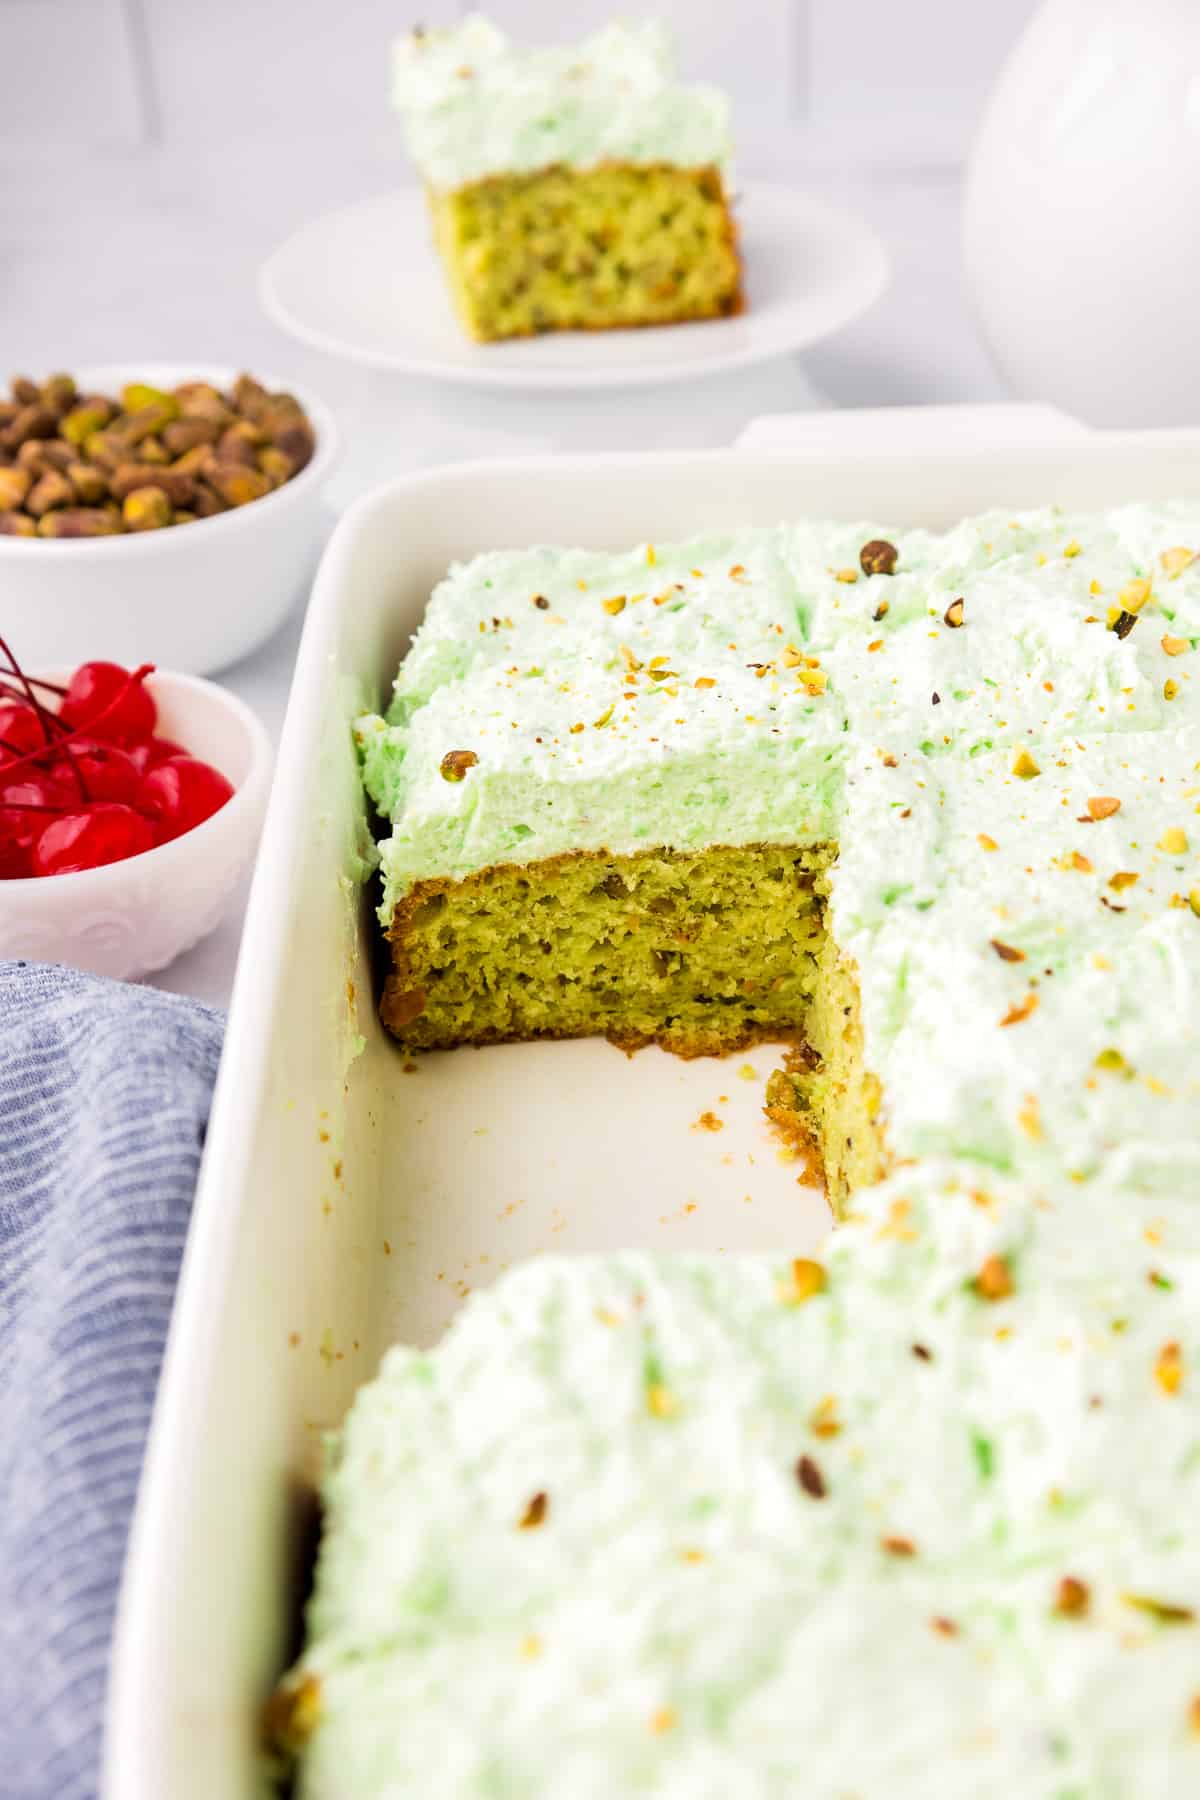 A white baking dish full of green frosted pistachio pudding cake with a slice of cake missing showing the cake underneath.